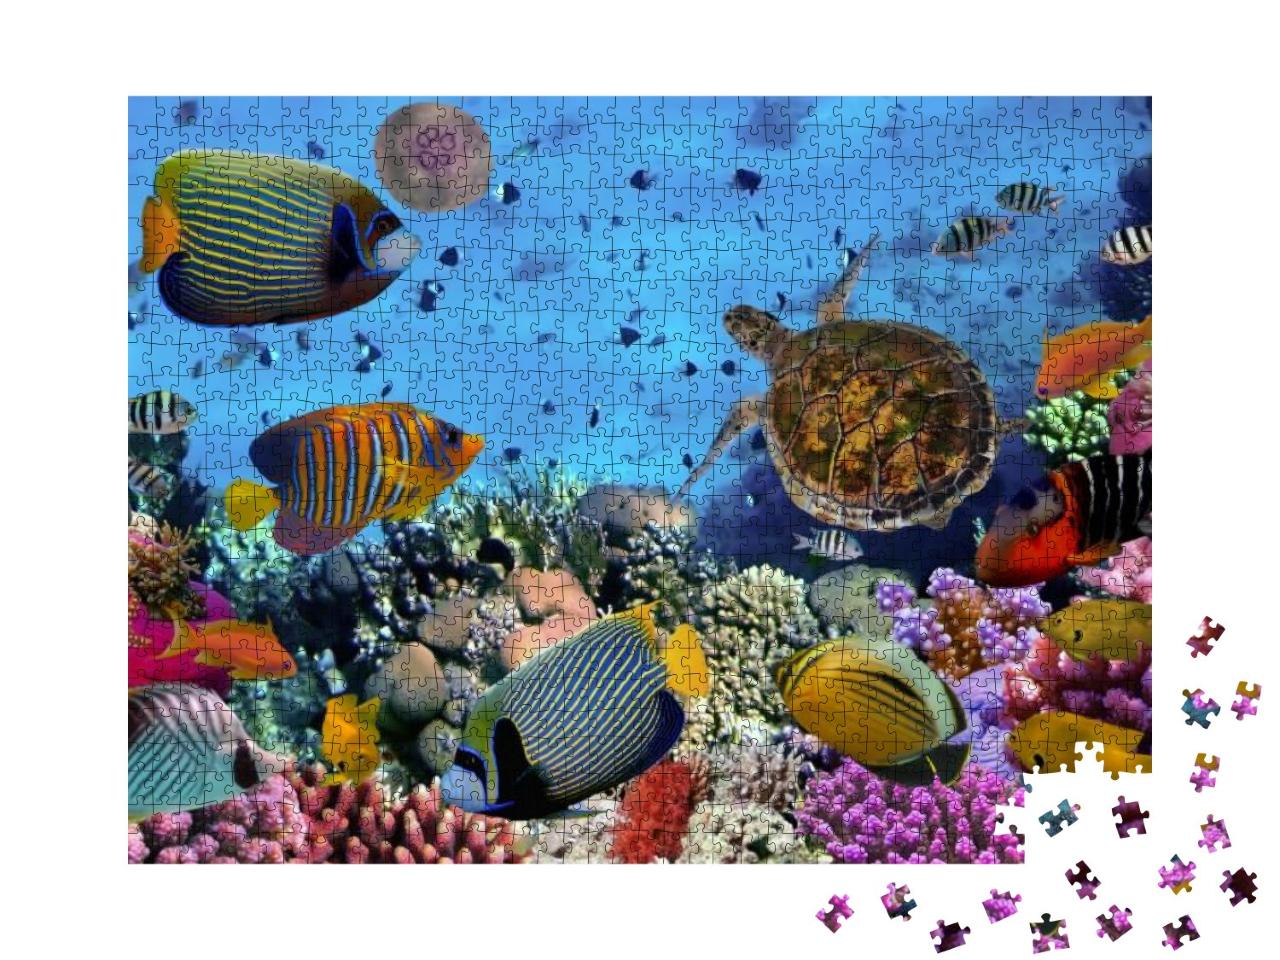 Colorful Coral Reef with Many Fishes & Sea Turtle... Jigsaw Puzzle with 1000 pieces